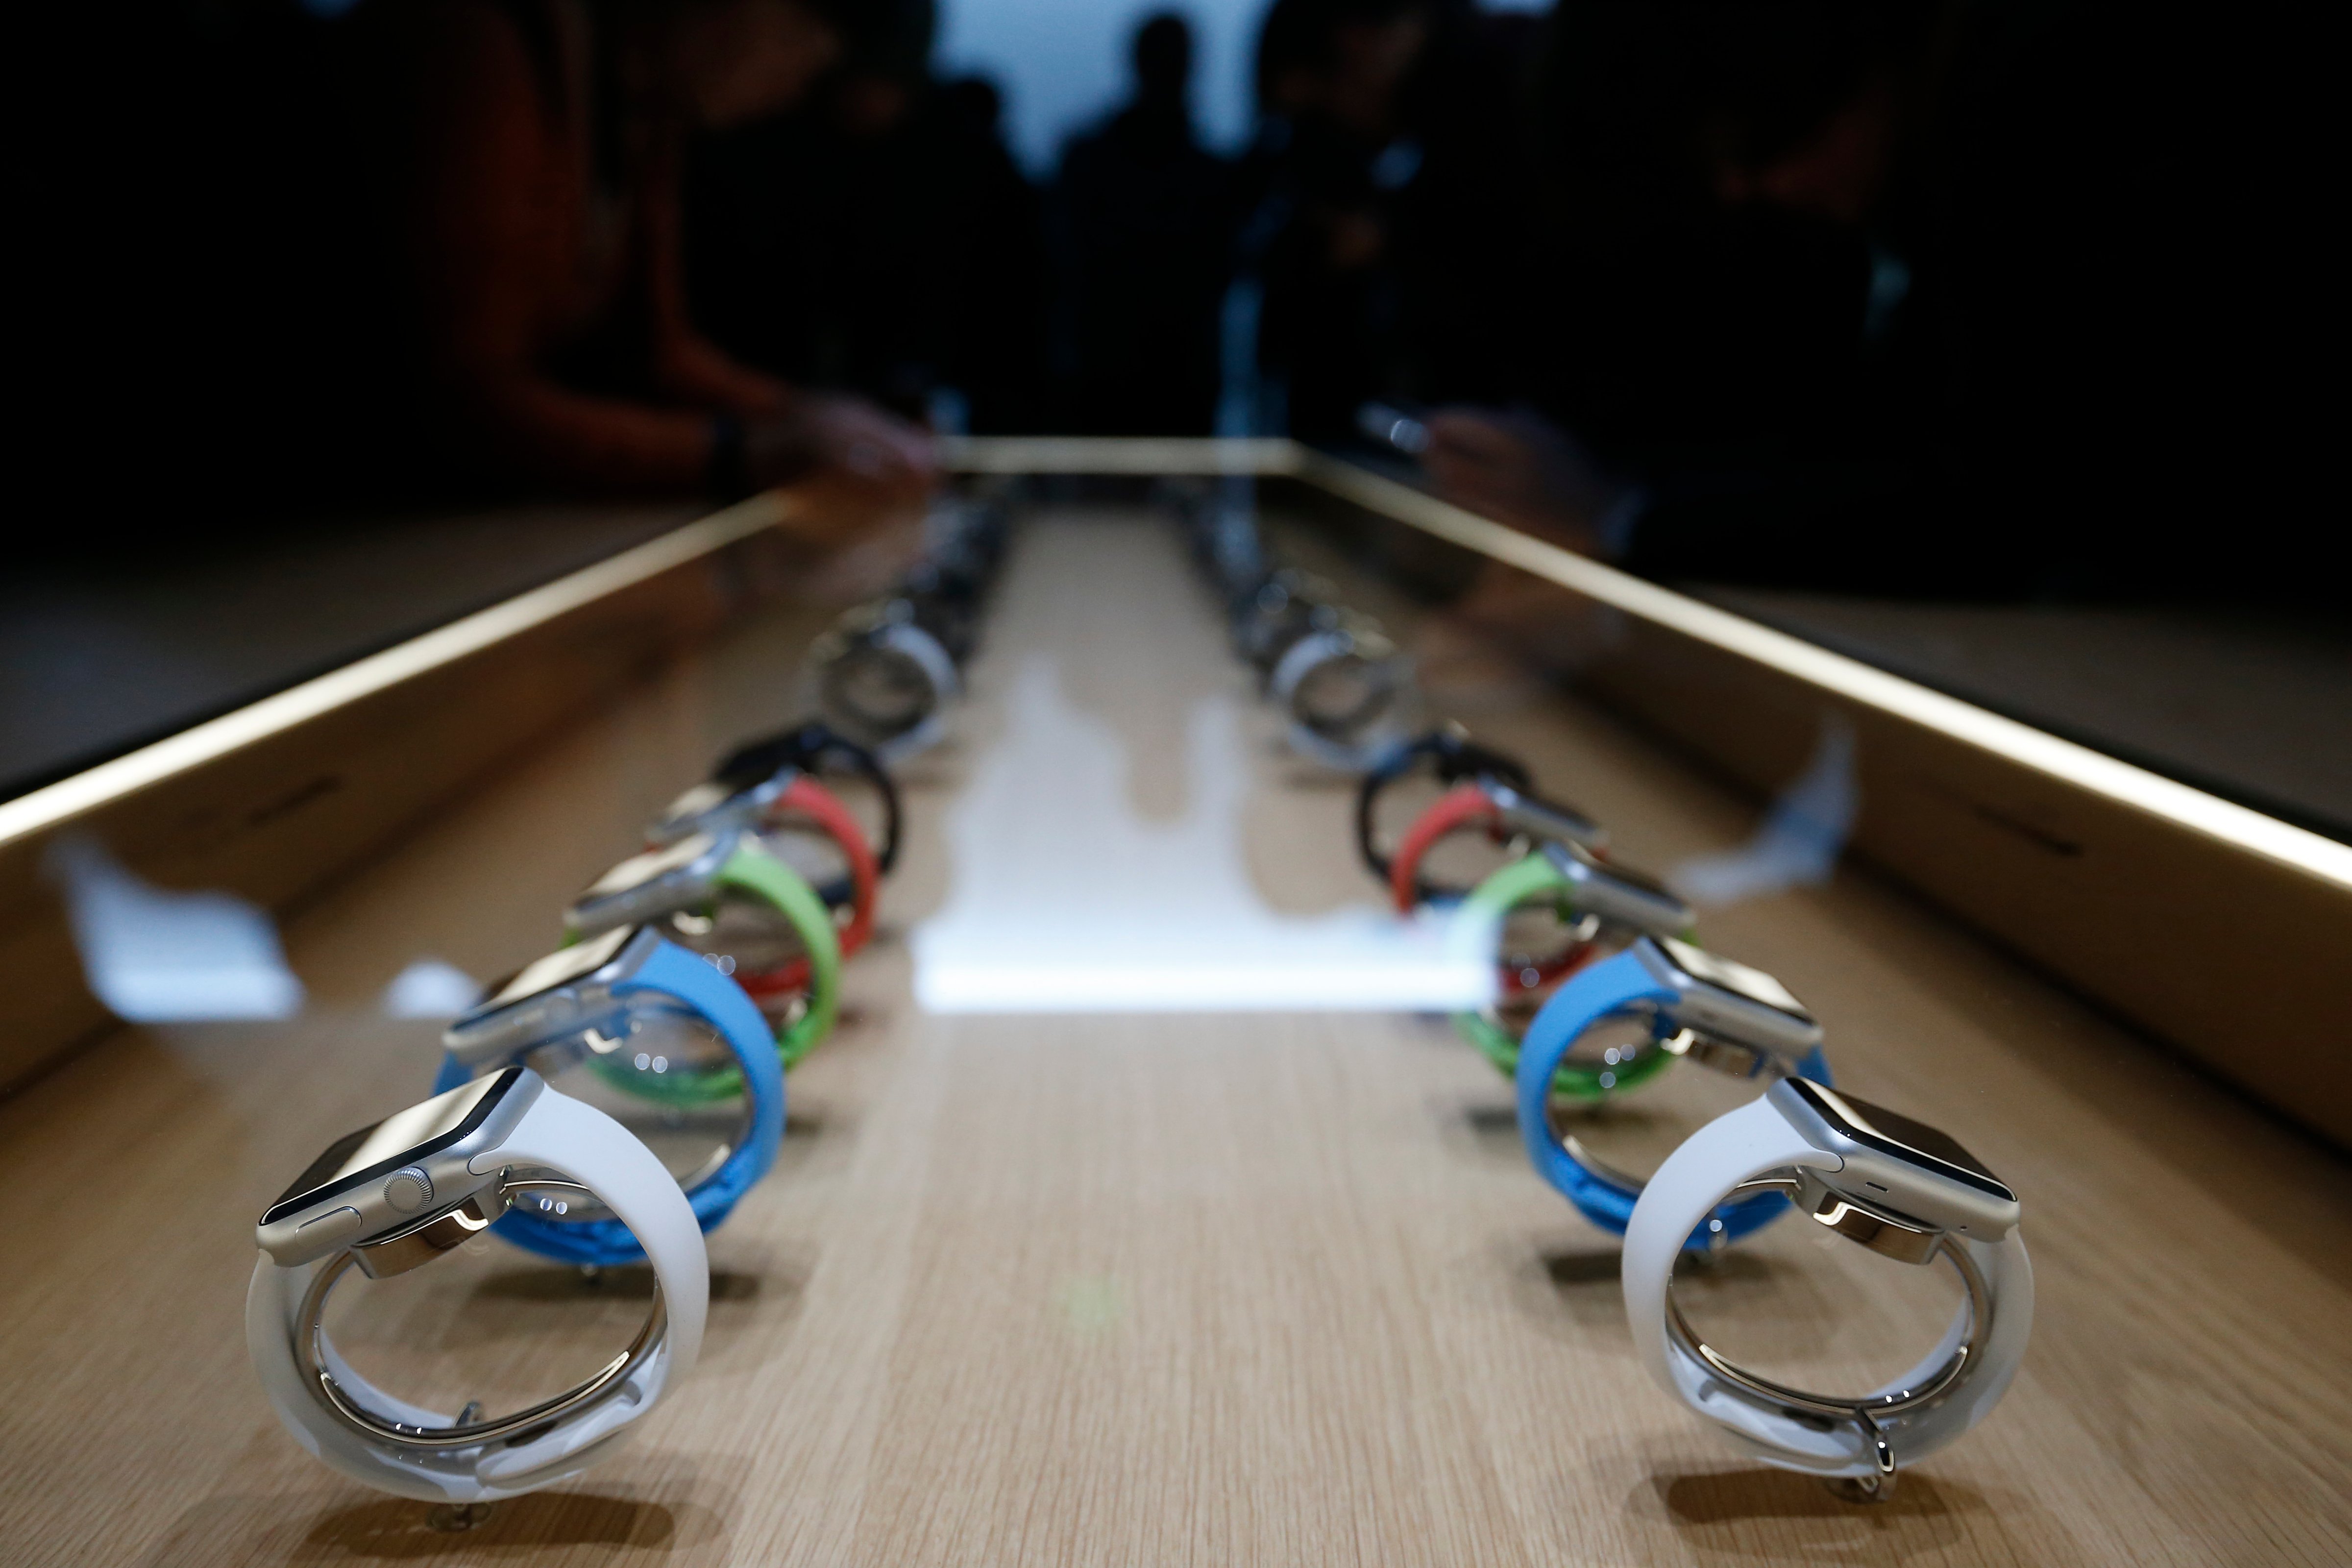 A collection of the new Apple Watch are seen on display after an Apple special event at the Yerba Buena Center for the Arts on March 9, 2015 in San Francisco, California. (Stephen Lam—Getty Images)